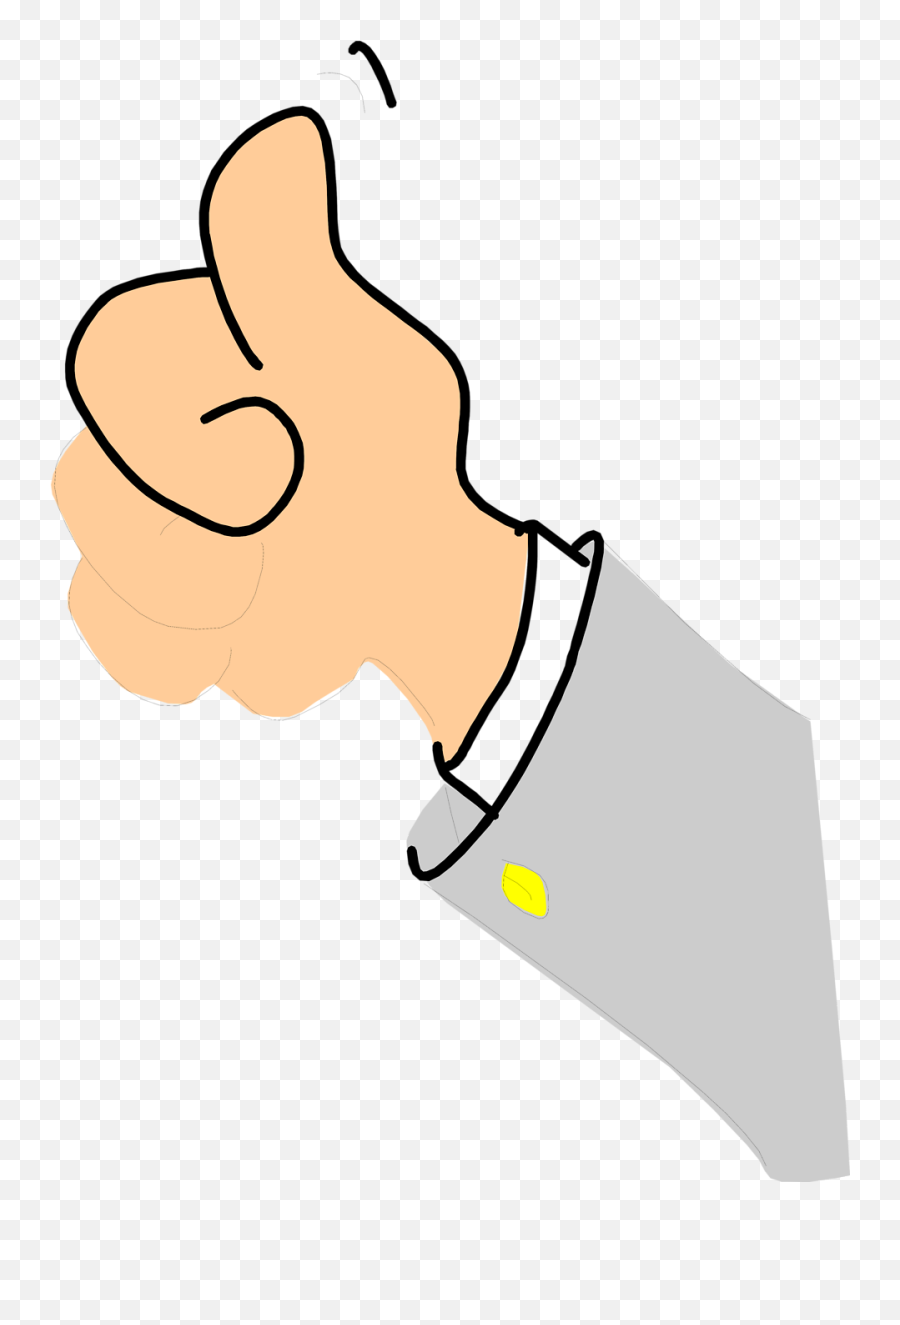 Free Thumbs Up Transparent Background - Animated Thumbs Up Transparent Background Png,Thumbs Up Transparent Background